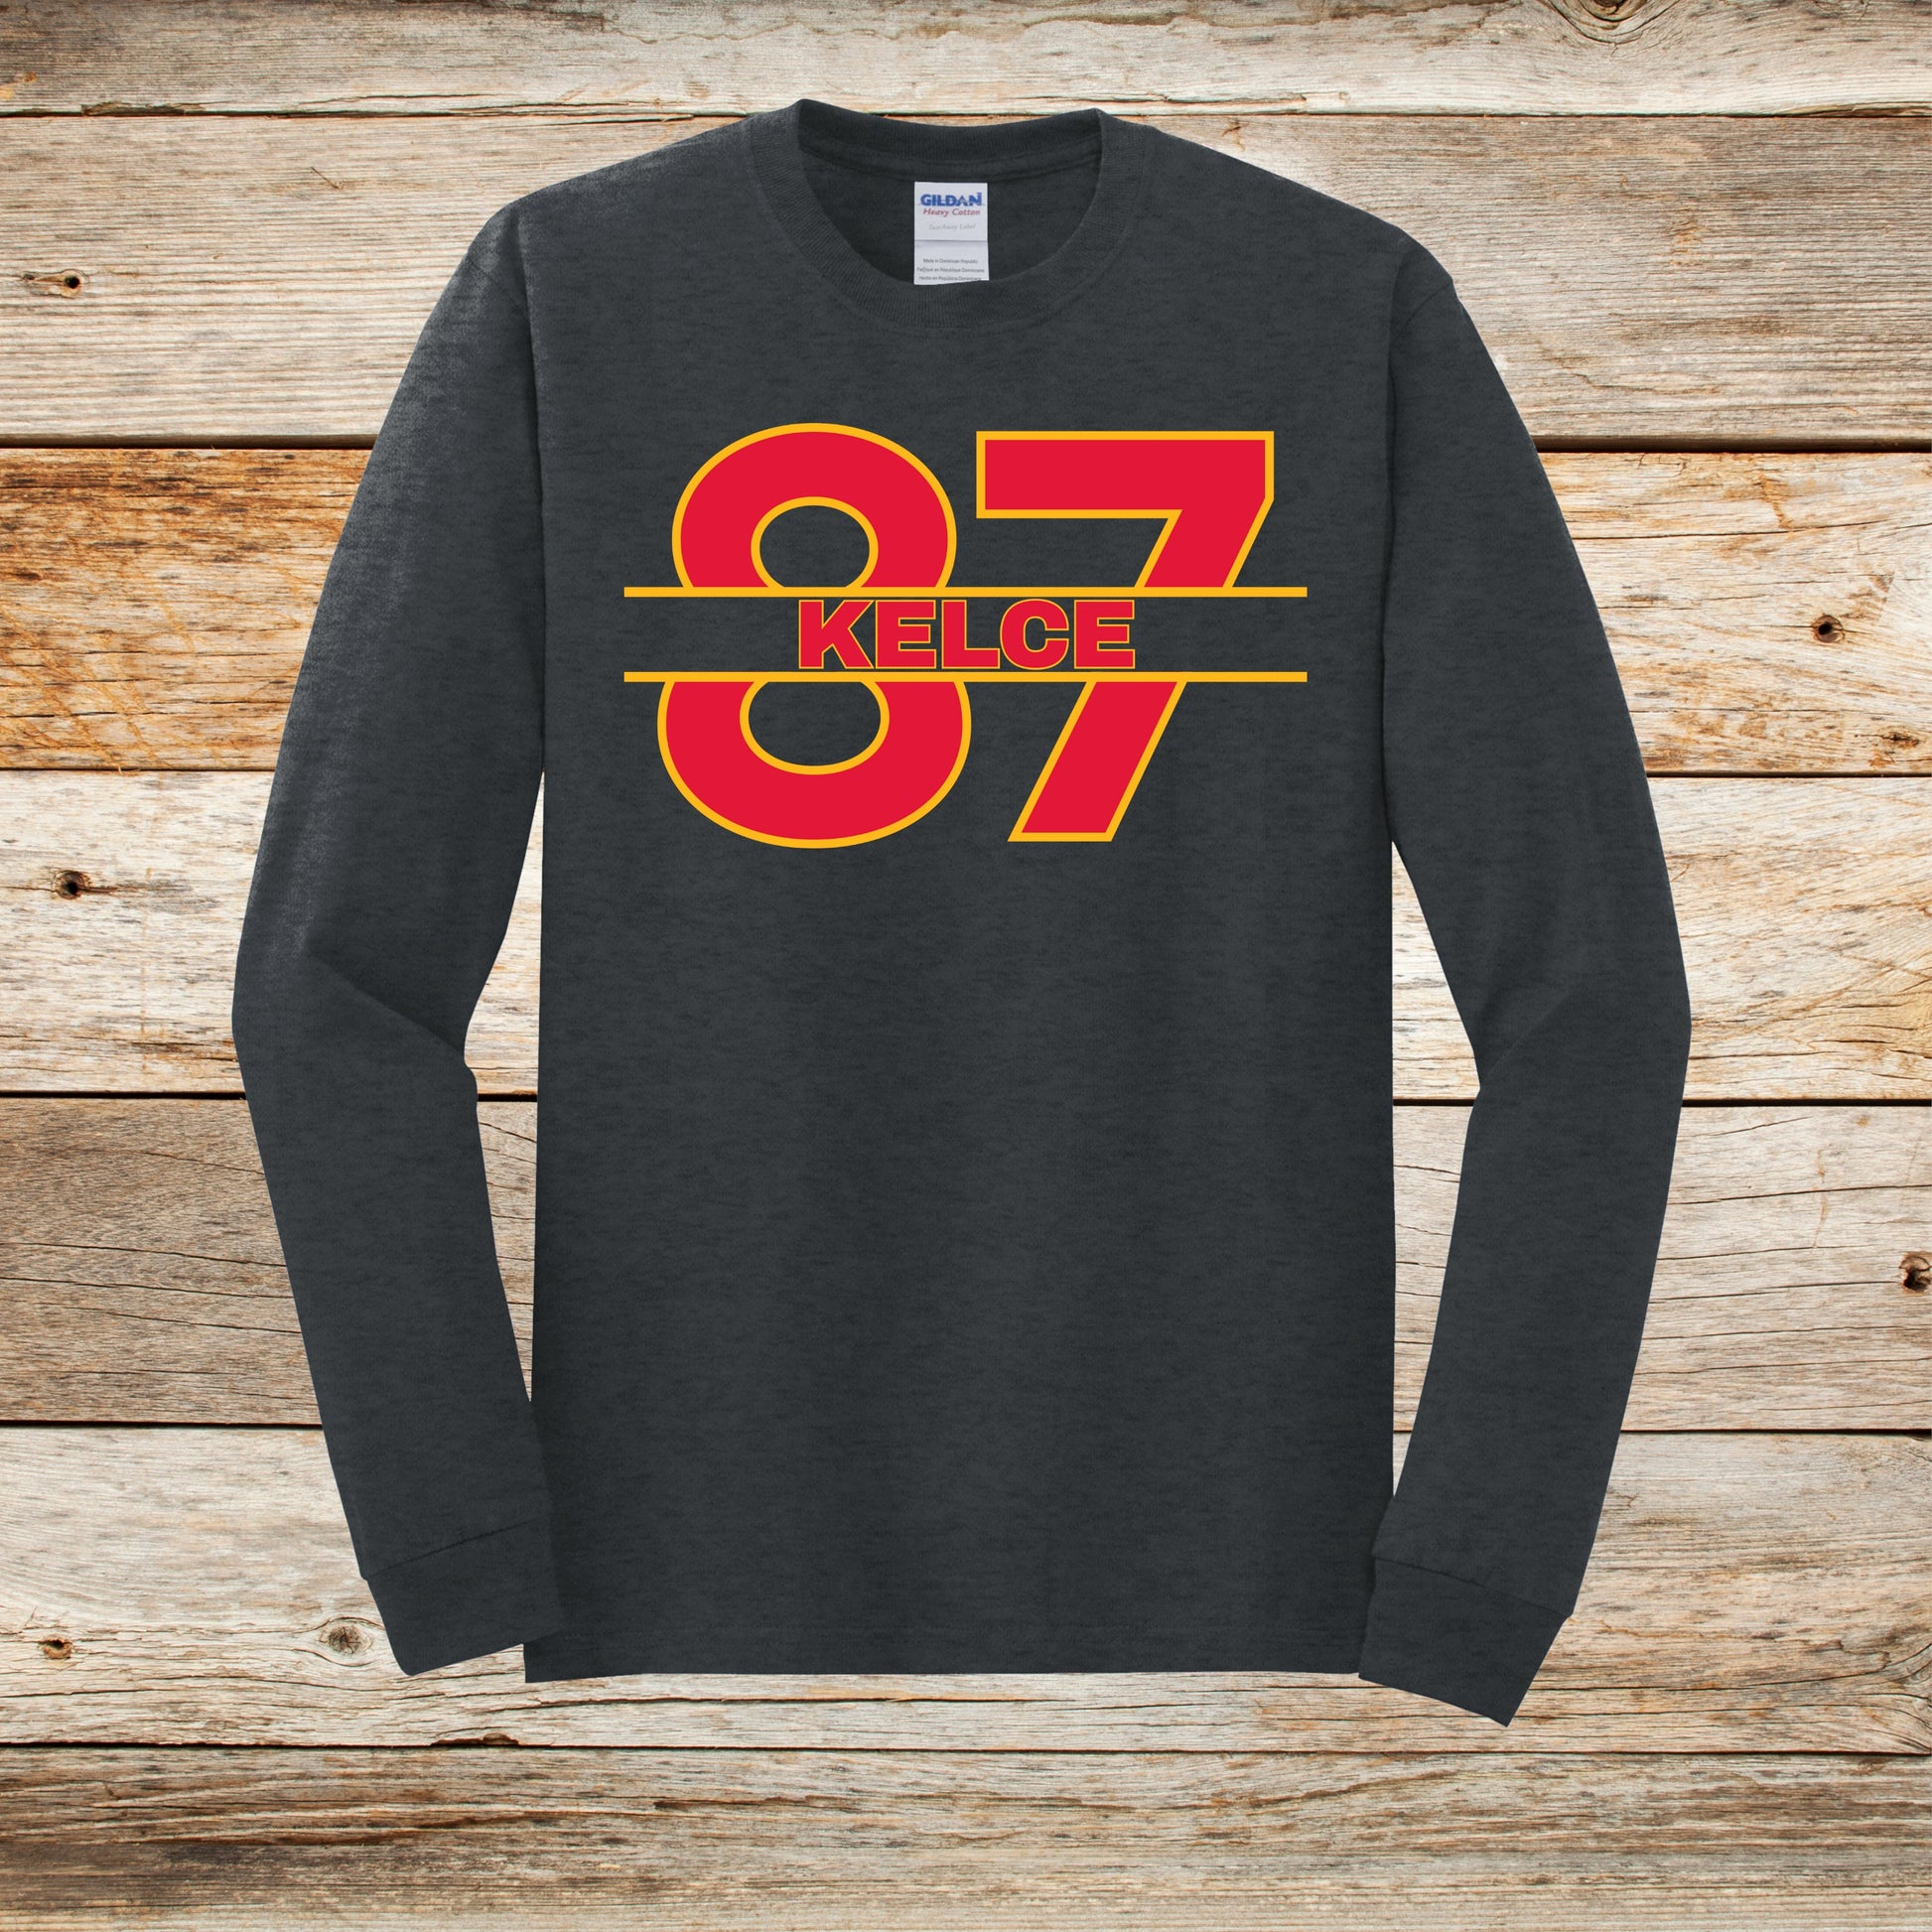 Football Long Sleeve T-Shirt - Chiefs Football - 87 Kelce - Adult and Children's Tee Shirts - Sports Long Sleeve T-Shirts Graphic Avenue Dark Heather Adult Small 